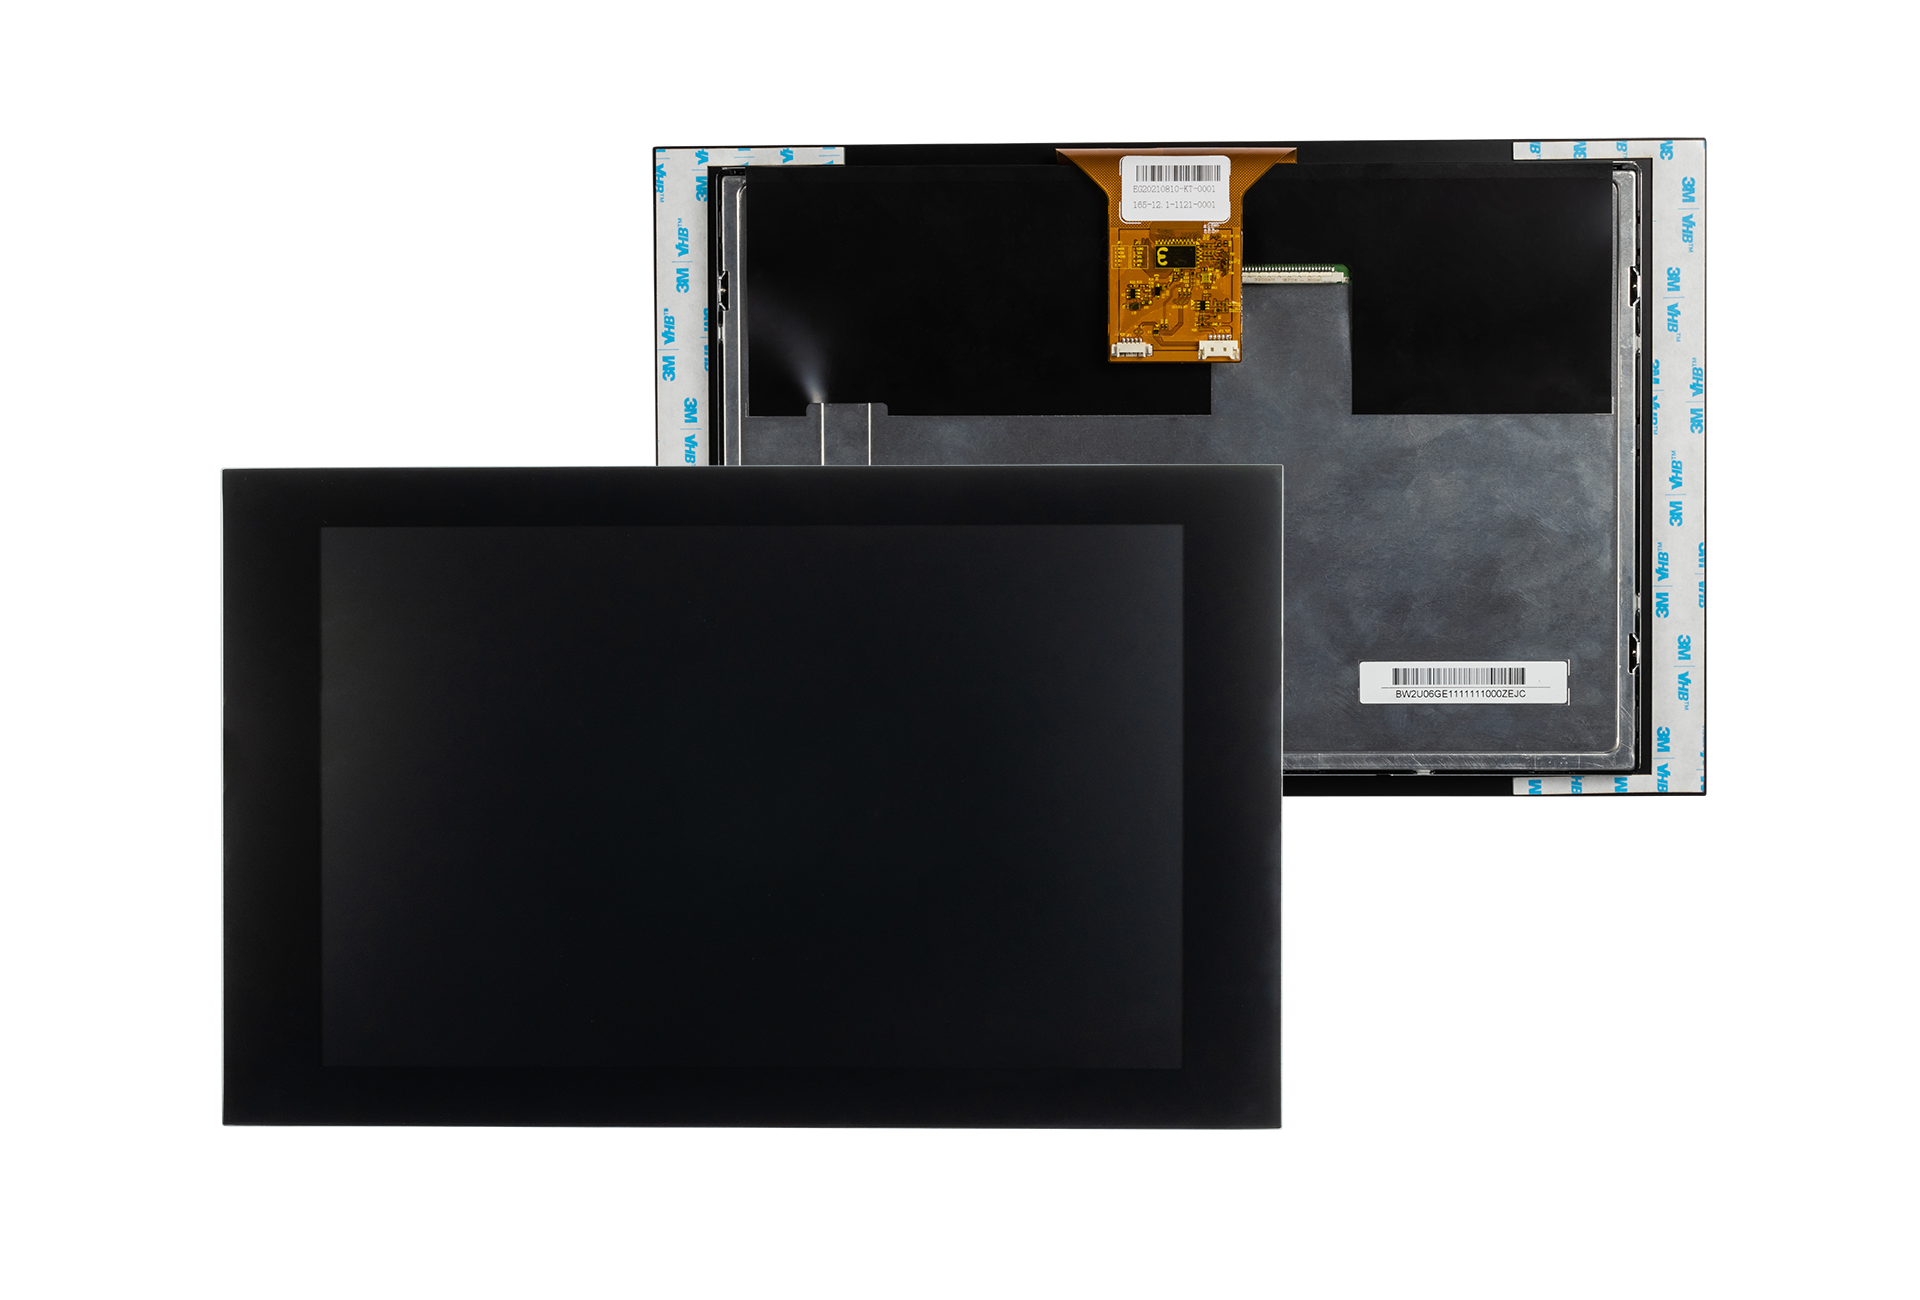 On display is a multitouch panel PC for medical technology, which is shown from the front as well as from behind with the technical detail